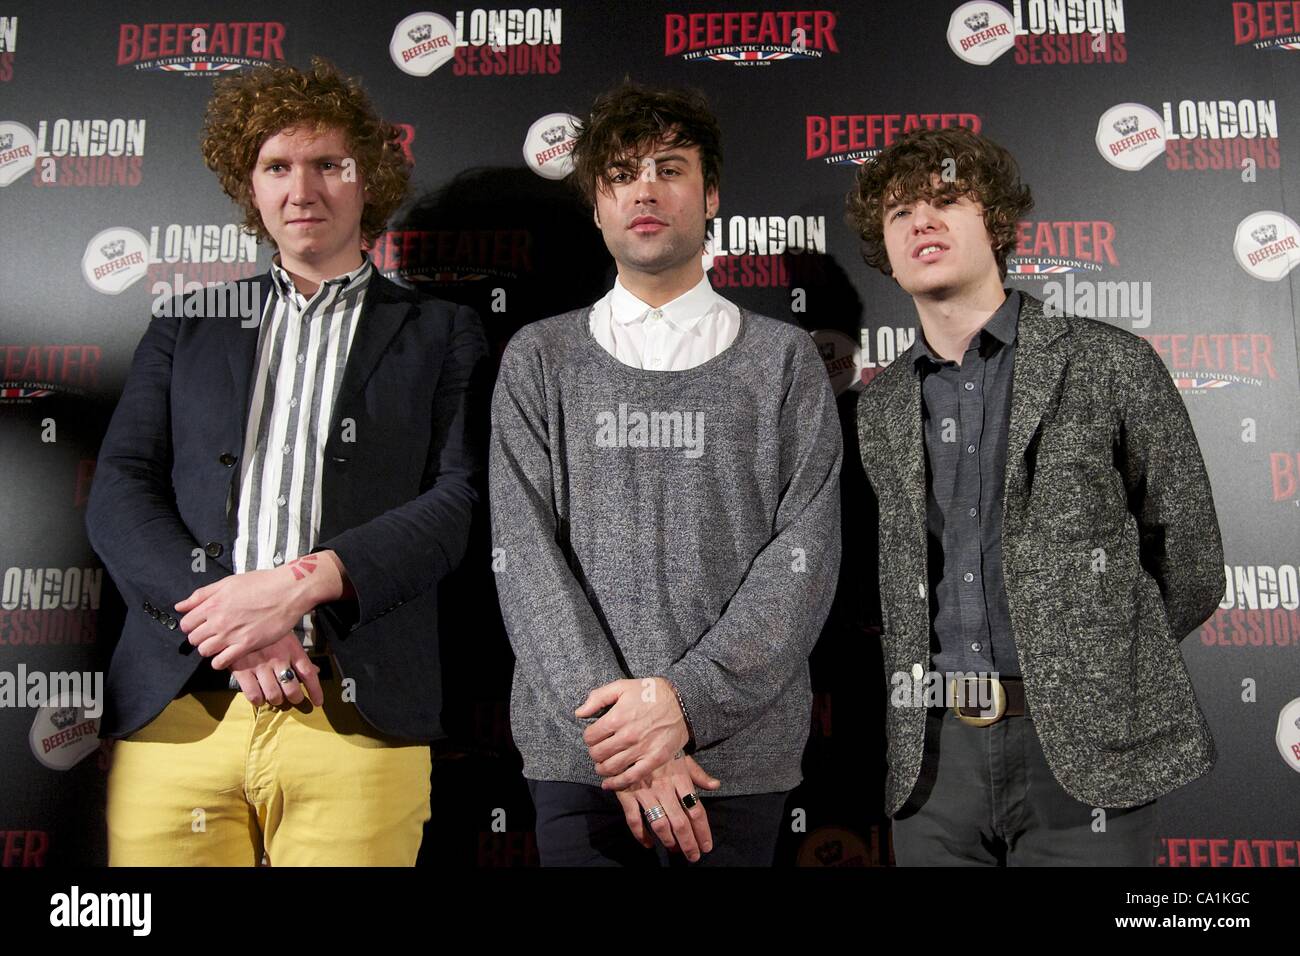 March 20, 2012 - Madrid, Spain - Luke Pritchard, Hugh Harris, Peter Denton, Paul Garred and George Manckuso from The Kooks attend a photocall during Beefeater London Sessions Festival at tipical spanish t'ablao' El Corral de la Pacheca in Madrid (Credit Image: © Jack Abuin/ZUMAPRESS.com) Stock Photo